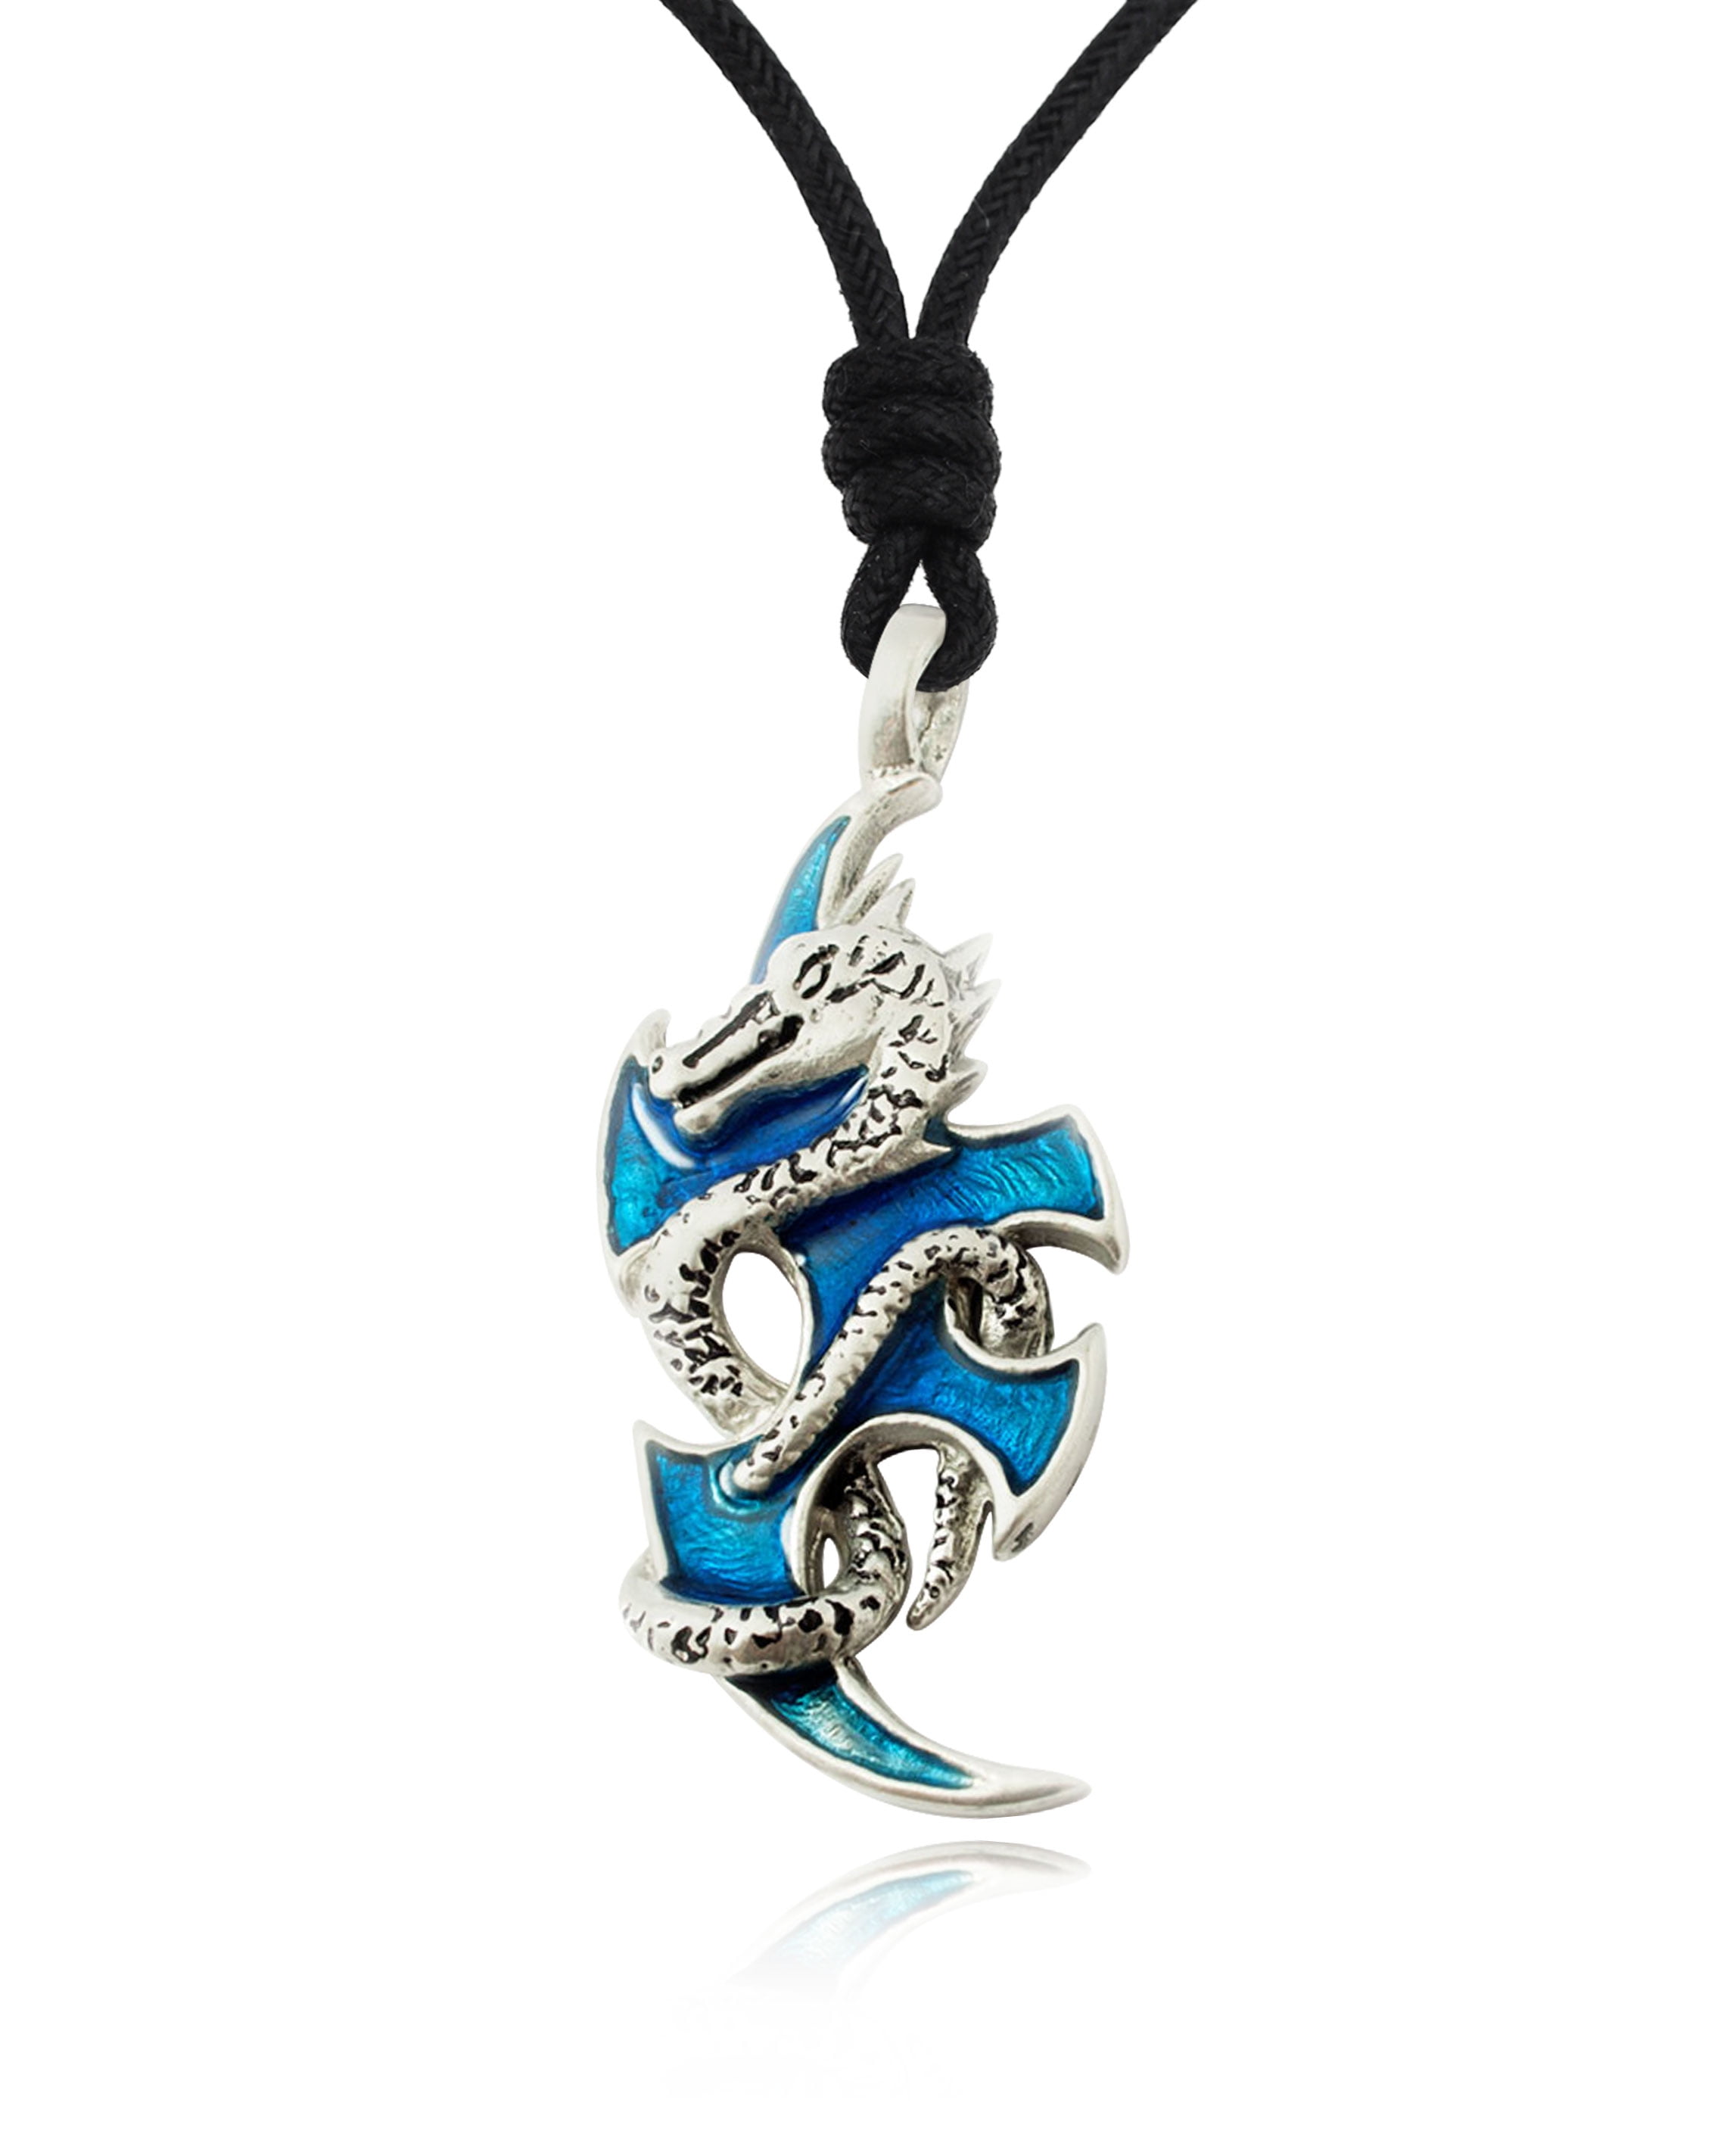 MET-00025: 45mm XL Pewter Dragon Charm with Blue Cabochon